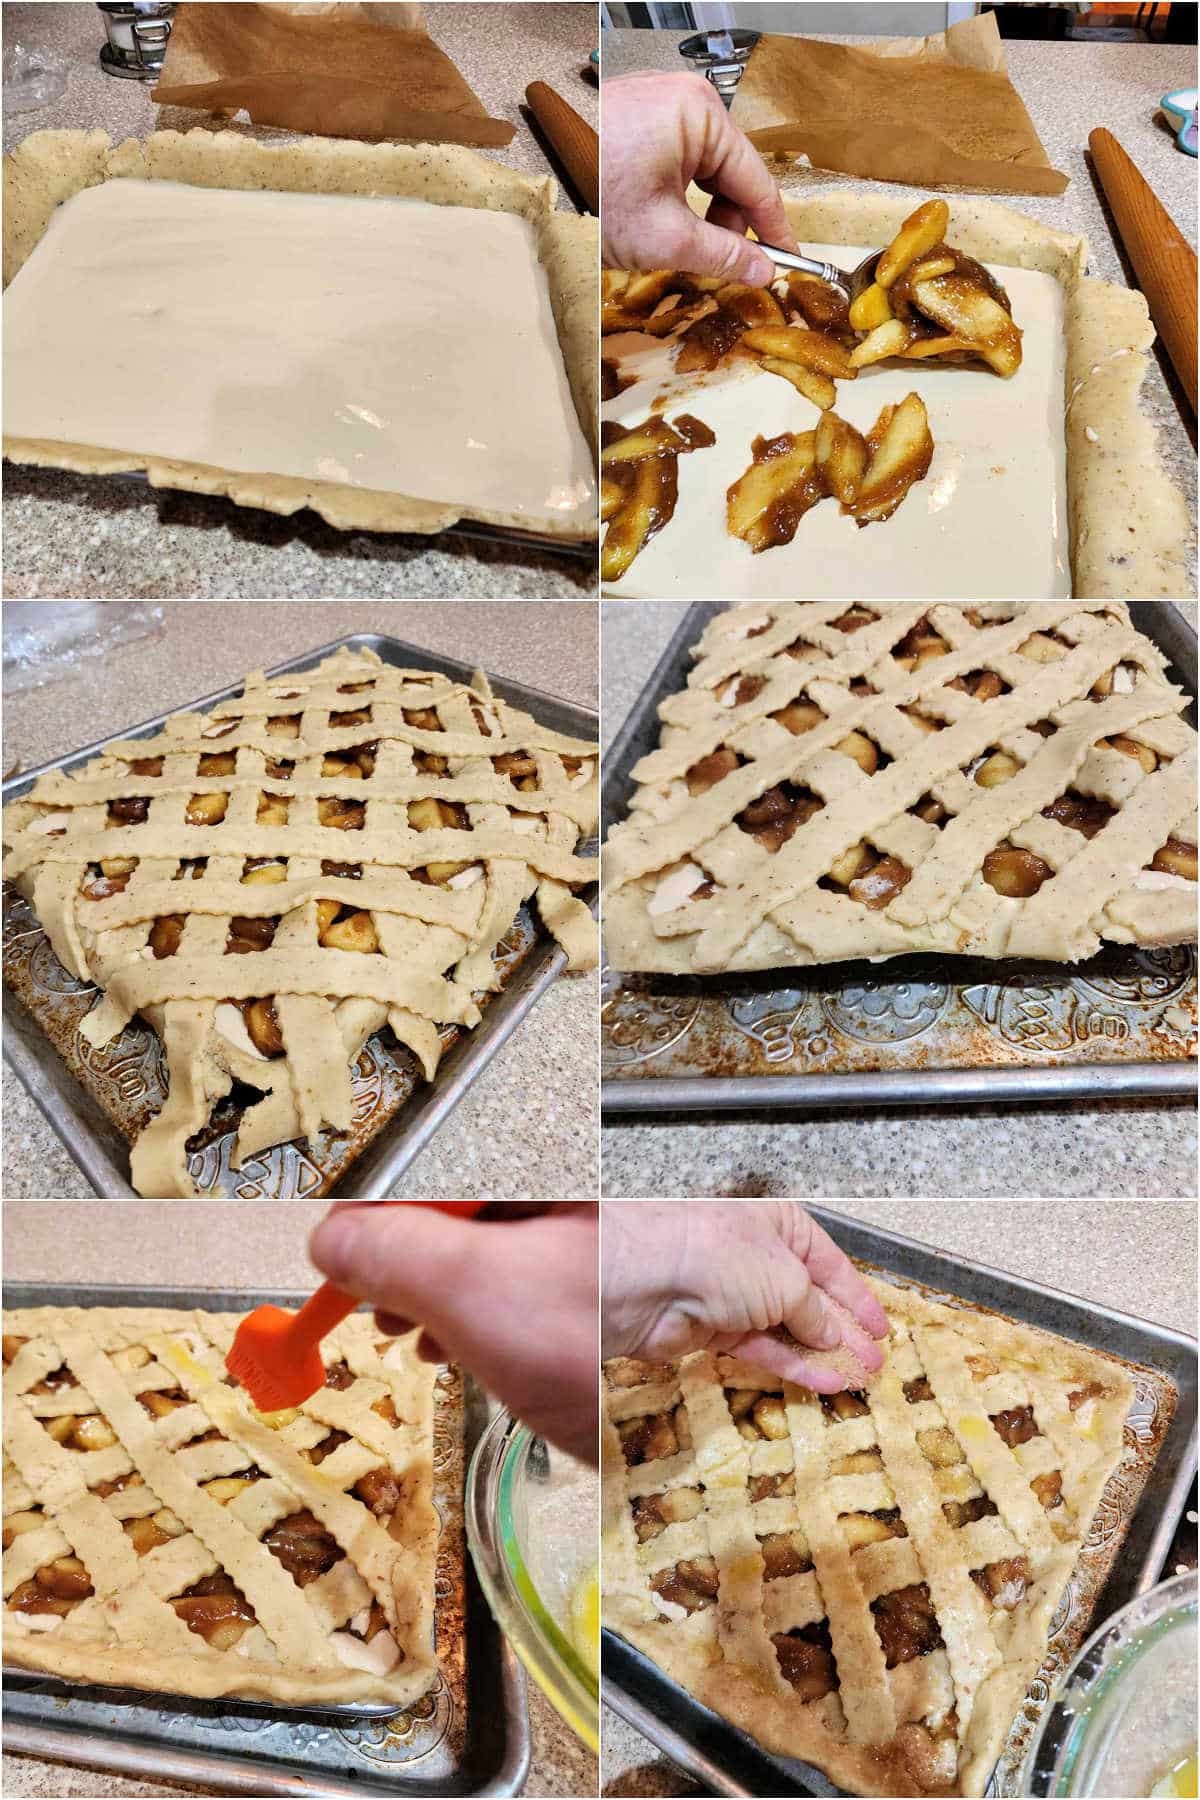 A collage of six images showing assembling an apple custard pie. 1)The custard filling in the lined pan. 2)Adding cooked apples on top of the custard. 3)Strips of dough arranged in a lattice over the fruit with edges hanging over the pan. 4)All the edges of the dough neatly trimmed and folded in. 5)Eggwashing the curst. 6)Sprinkling the crust with coarse sugar.